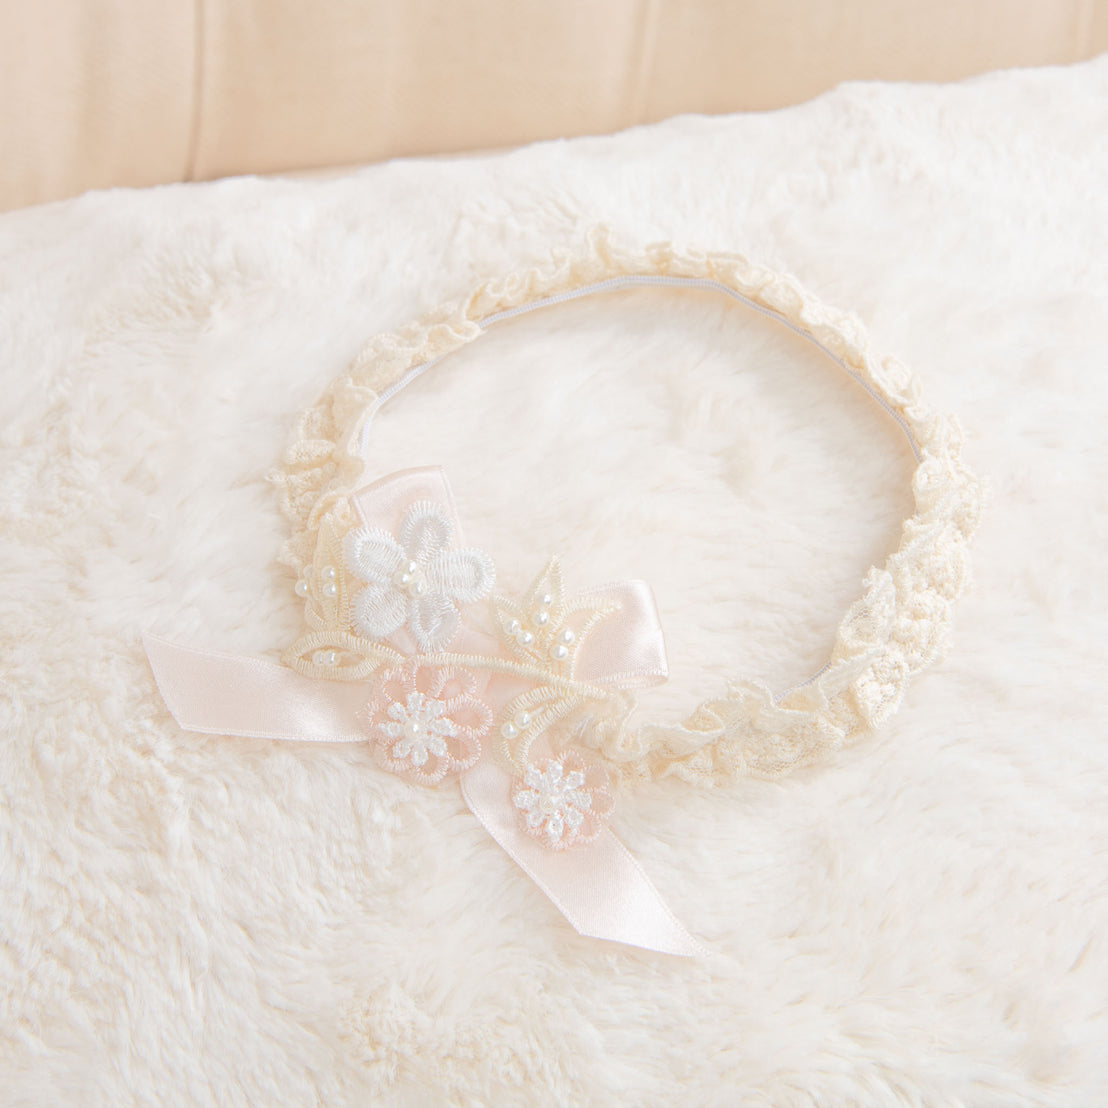 The Jessica Headband, a delicate floral lace headband with soft pink ribbon accents, rests on a soft white background.